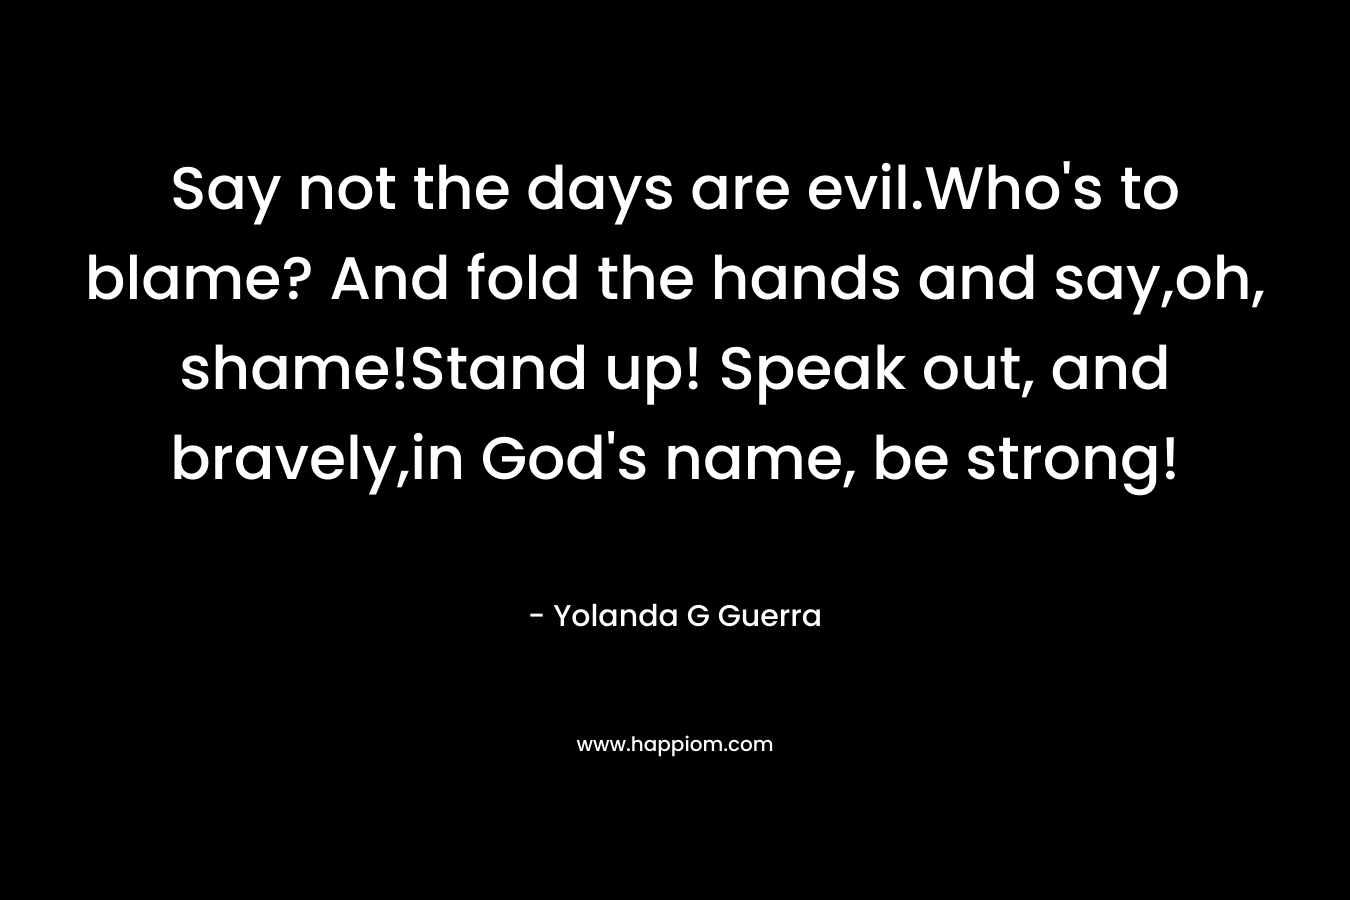 Say not the days are evil.Who’s to blame? And fold the hands and say,oh, shame!Stand up! Speak out, and bravely,in God’s name, be strong! – Yolanda G Guerra